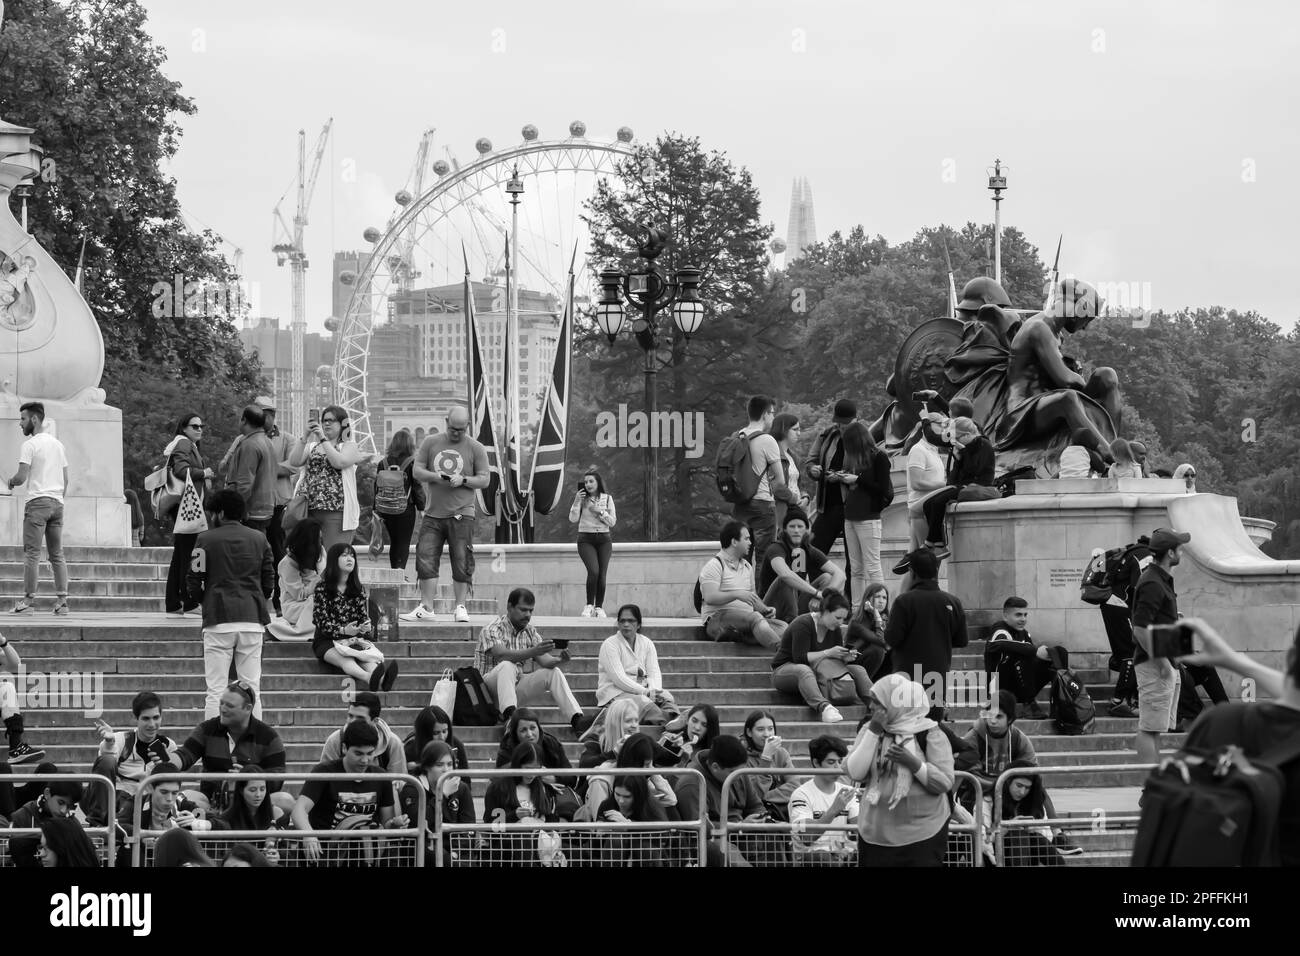 London, United Kingdom - May 23, 2018 : View of tourists at the Queen Victoria Memorial and the London Eye in the background in black and white Stock Photo